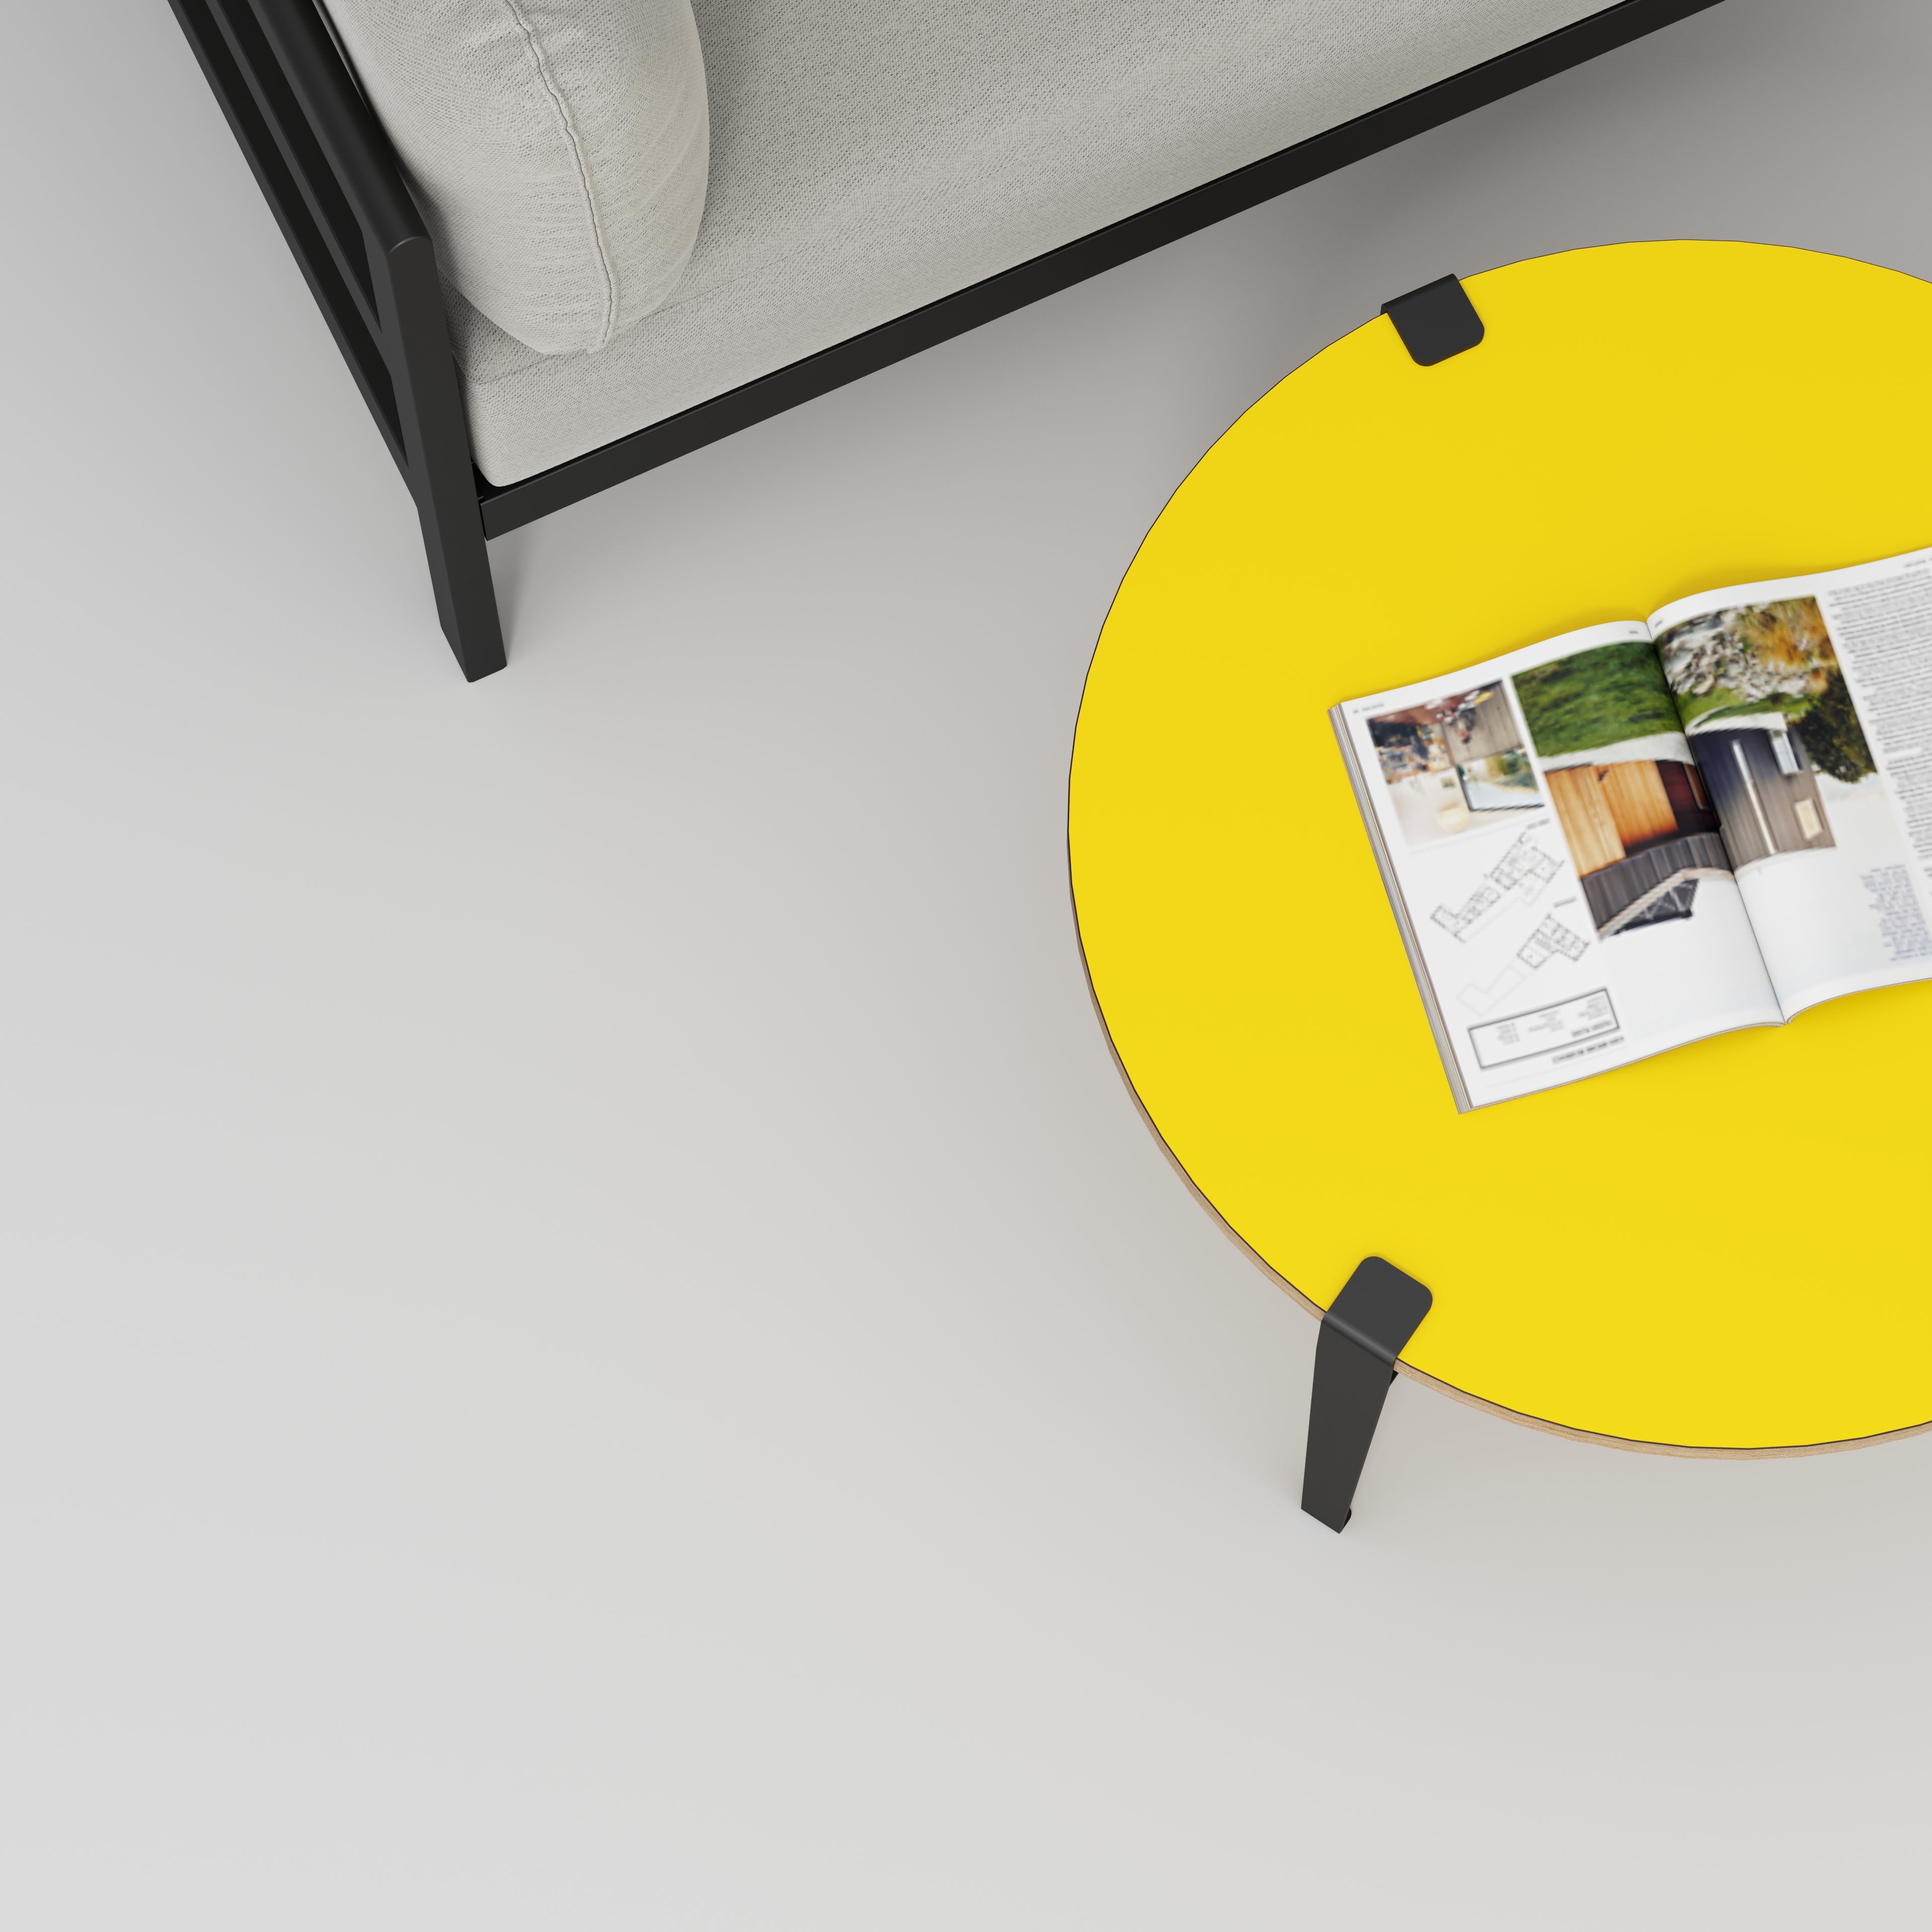 Round Coffee Table with Black Tiptoe Legs - Formica Chrome Yellow - 800(dia) x 430(h)